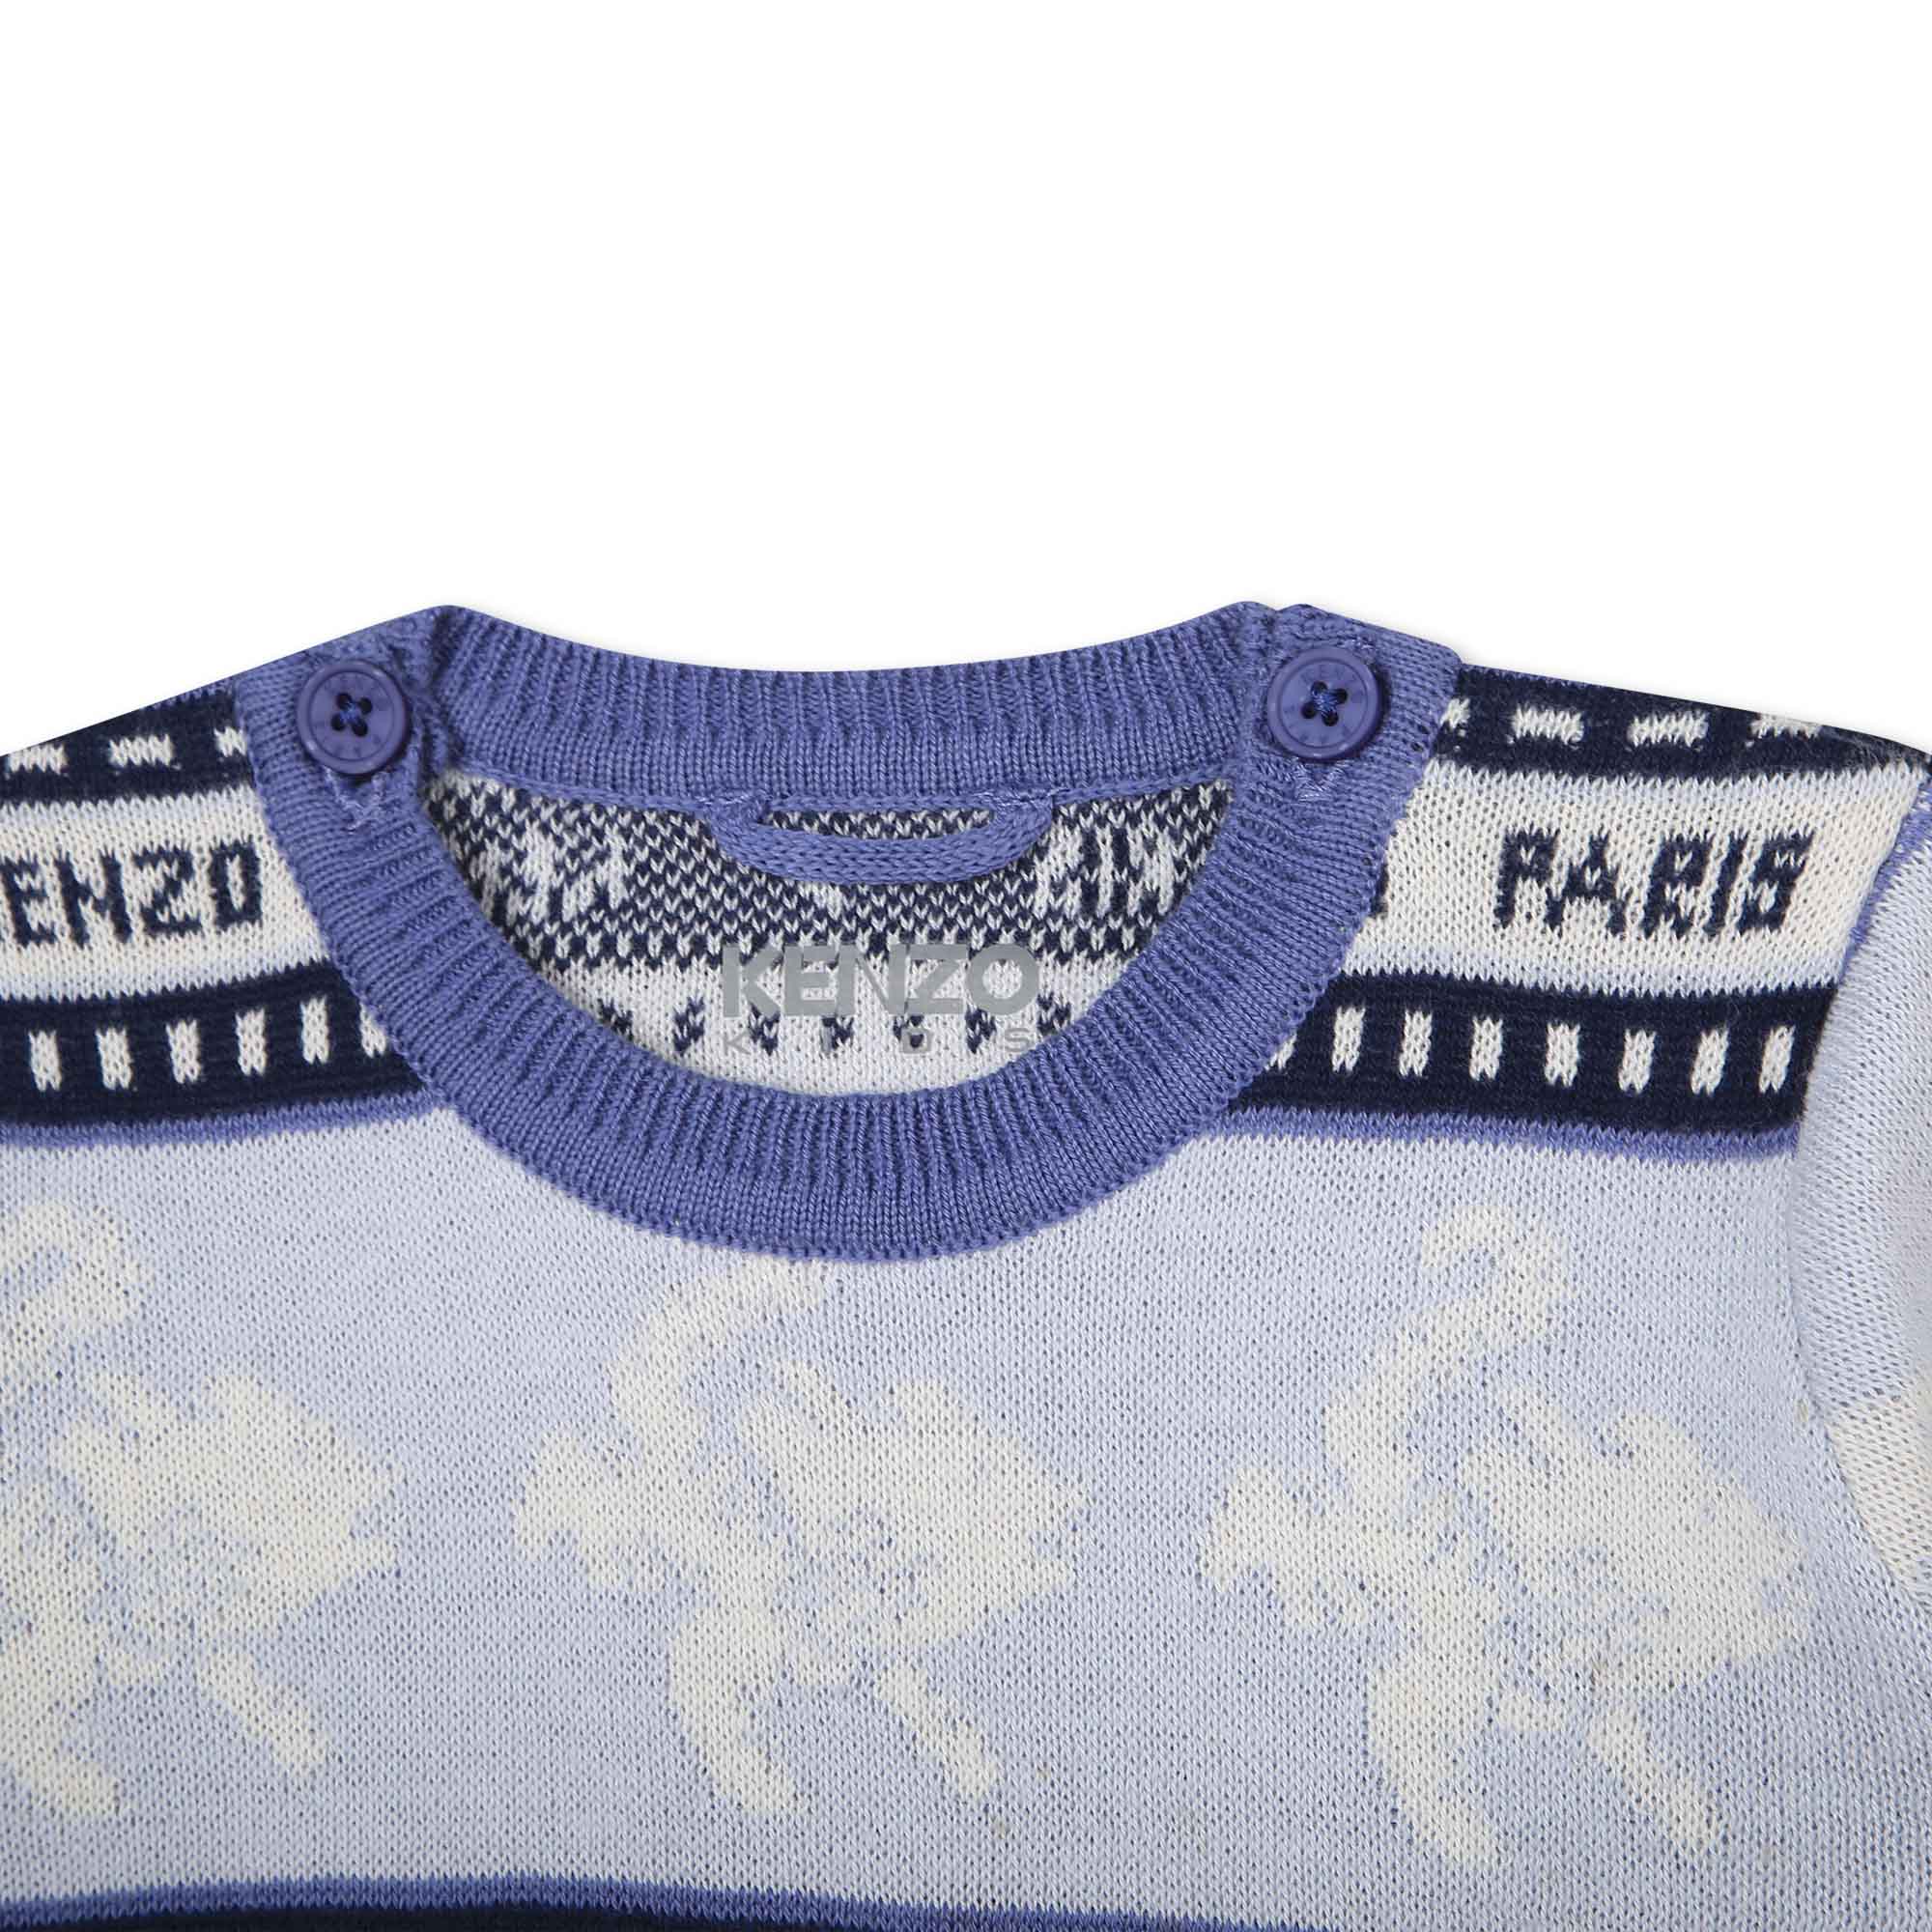 Jumper and bottoms outfit KENZO KIDS for BOY